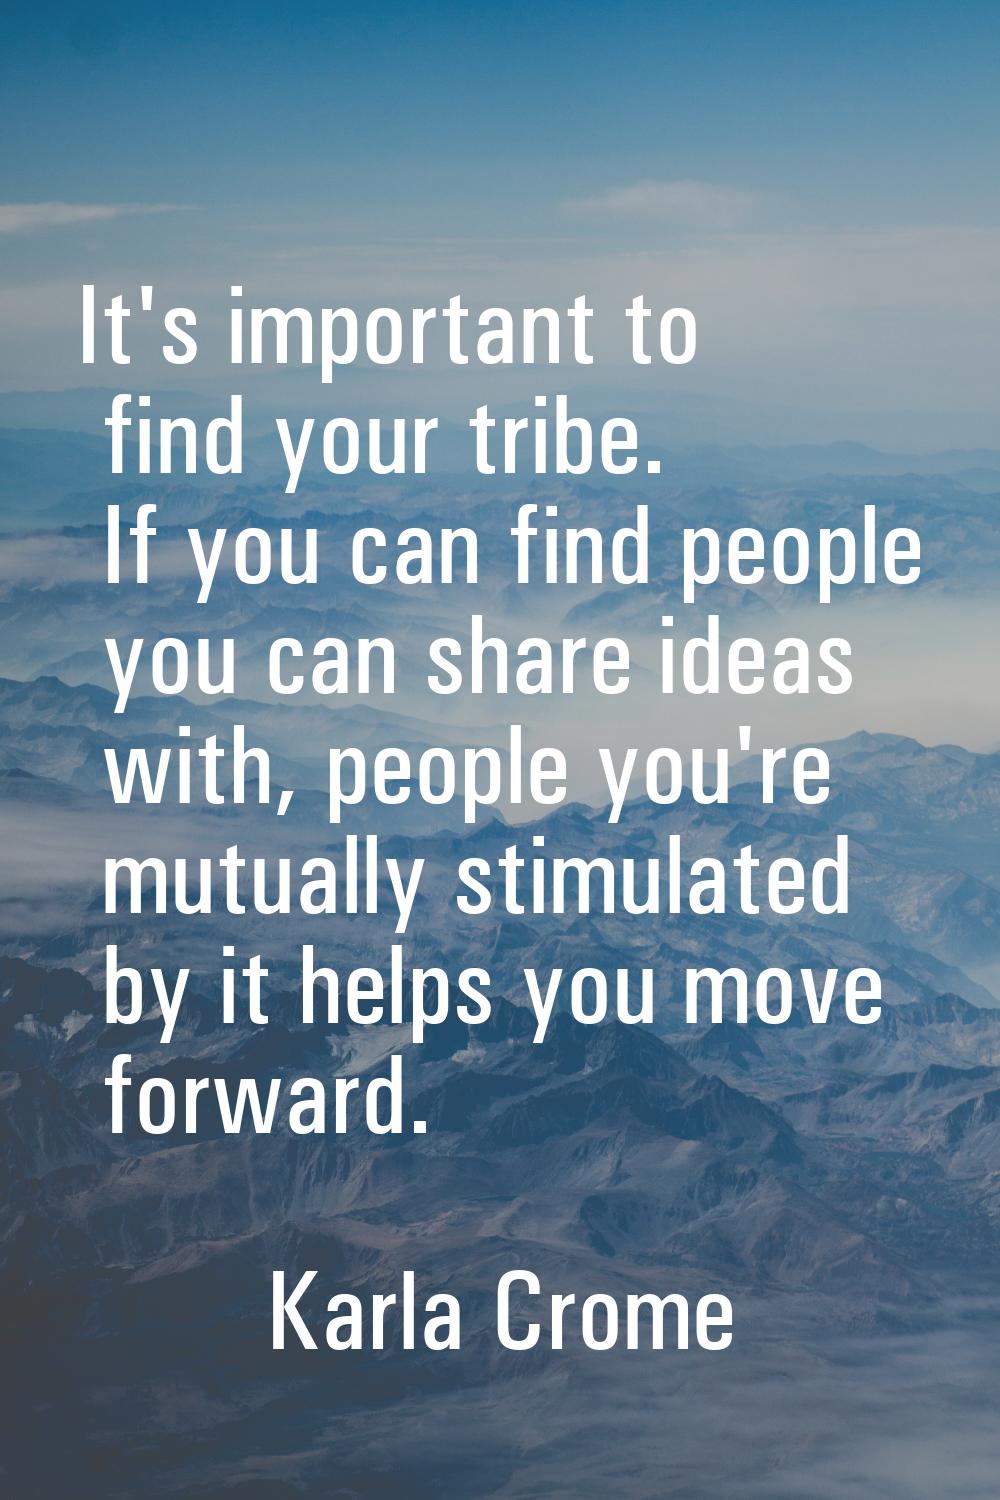 It's important to find your tribe. If you can find people you can share ideas with, people you're m